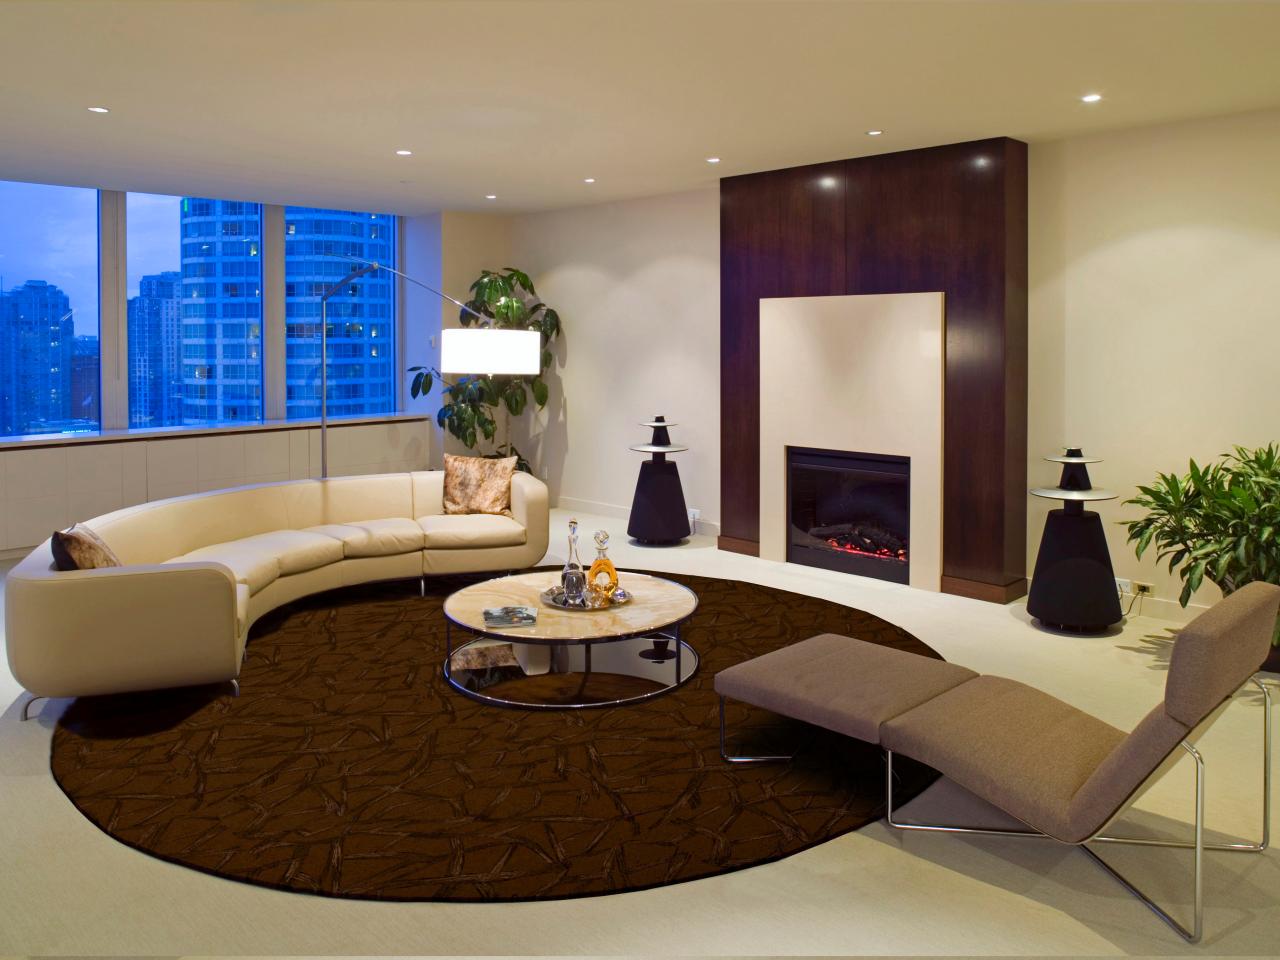 Minimalist Living Round Astonishing Minimalist Living Room In Round Design With White Sofa And Round Table On Dark Brown Circle Living Room Rugs Also Furnished With Gray Sleeper Chair How To Choose Special Living Room Rugs